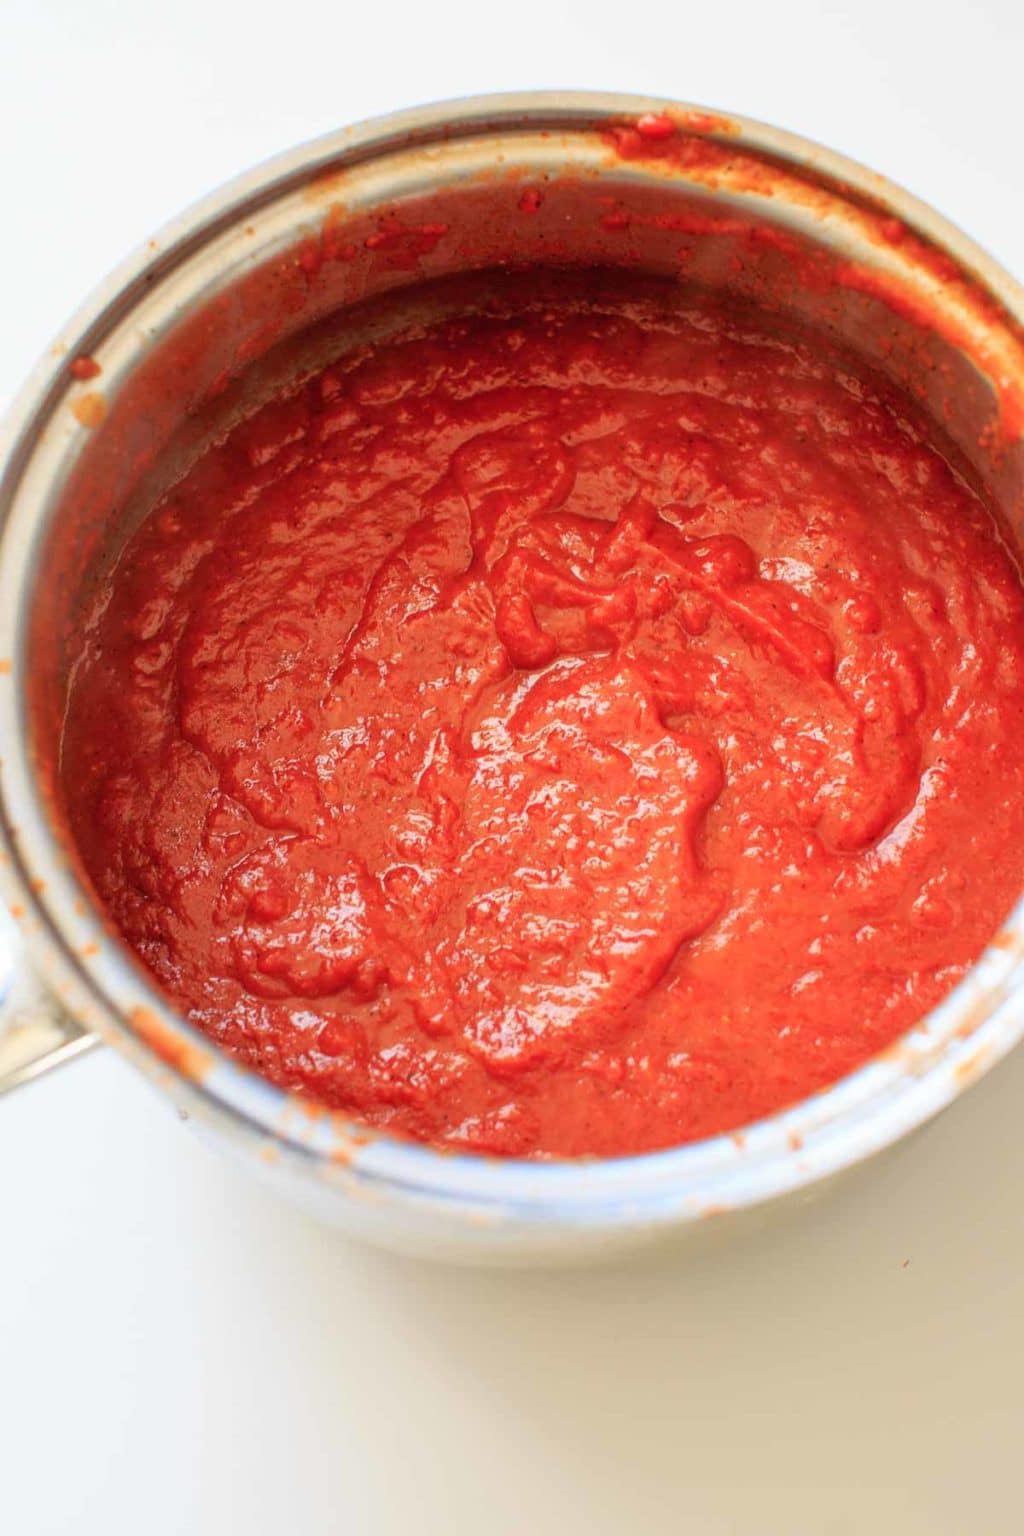 Homemade Enchilada Sauce. A 15 minute, easy recipe that you can customize with spices and tastes much better than store-bought cans.